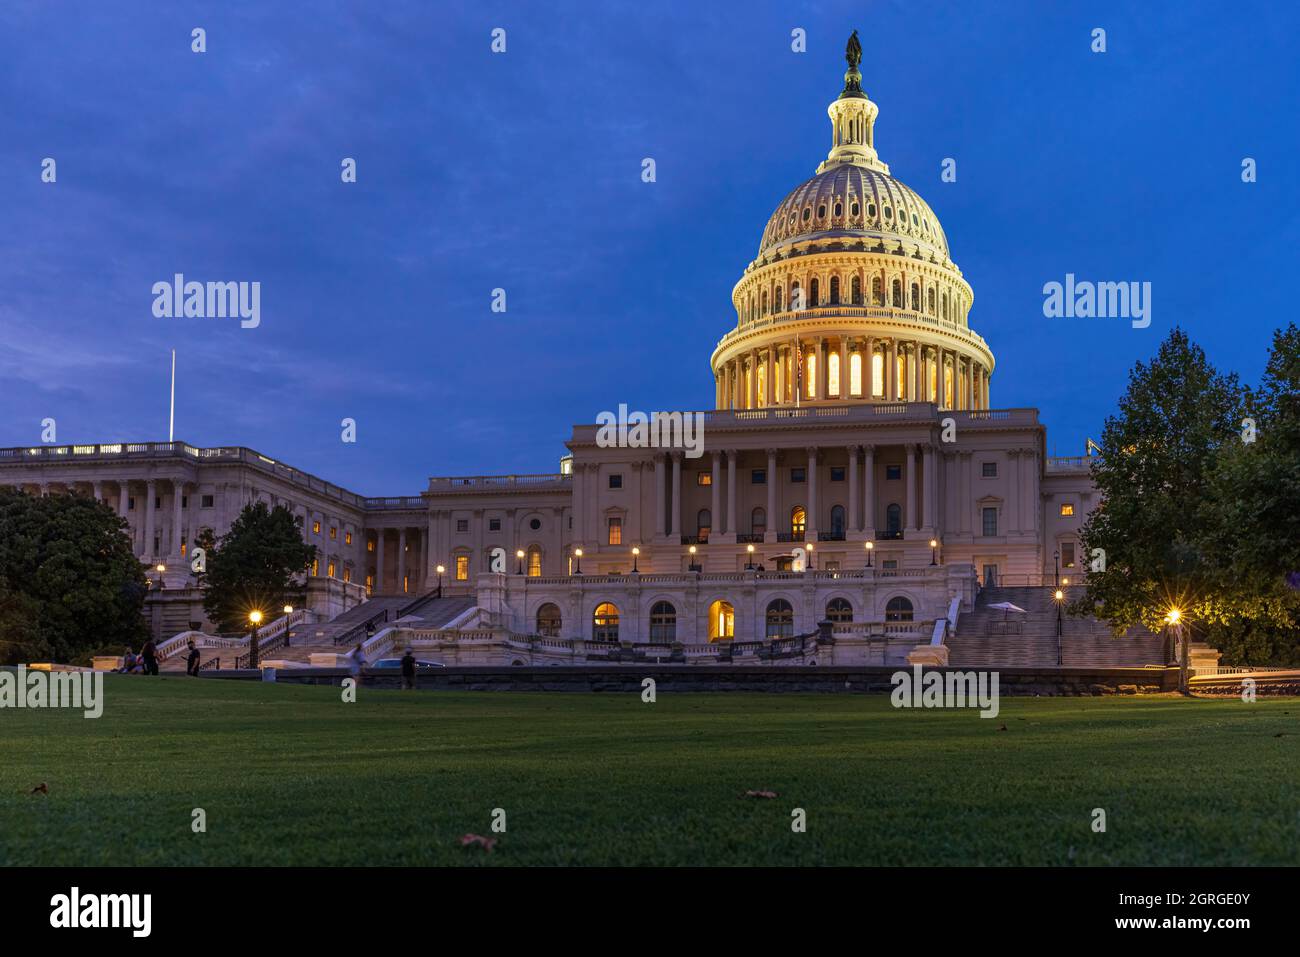 WASHINGTON DC, USA - SEPTEMBER 20, 2021: View of The United States Capitol Building, home of the USA Congress on National Mall in Washington, D.C. Stock Photo